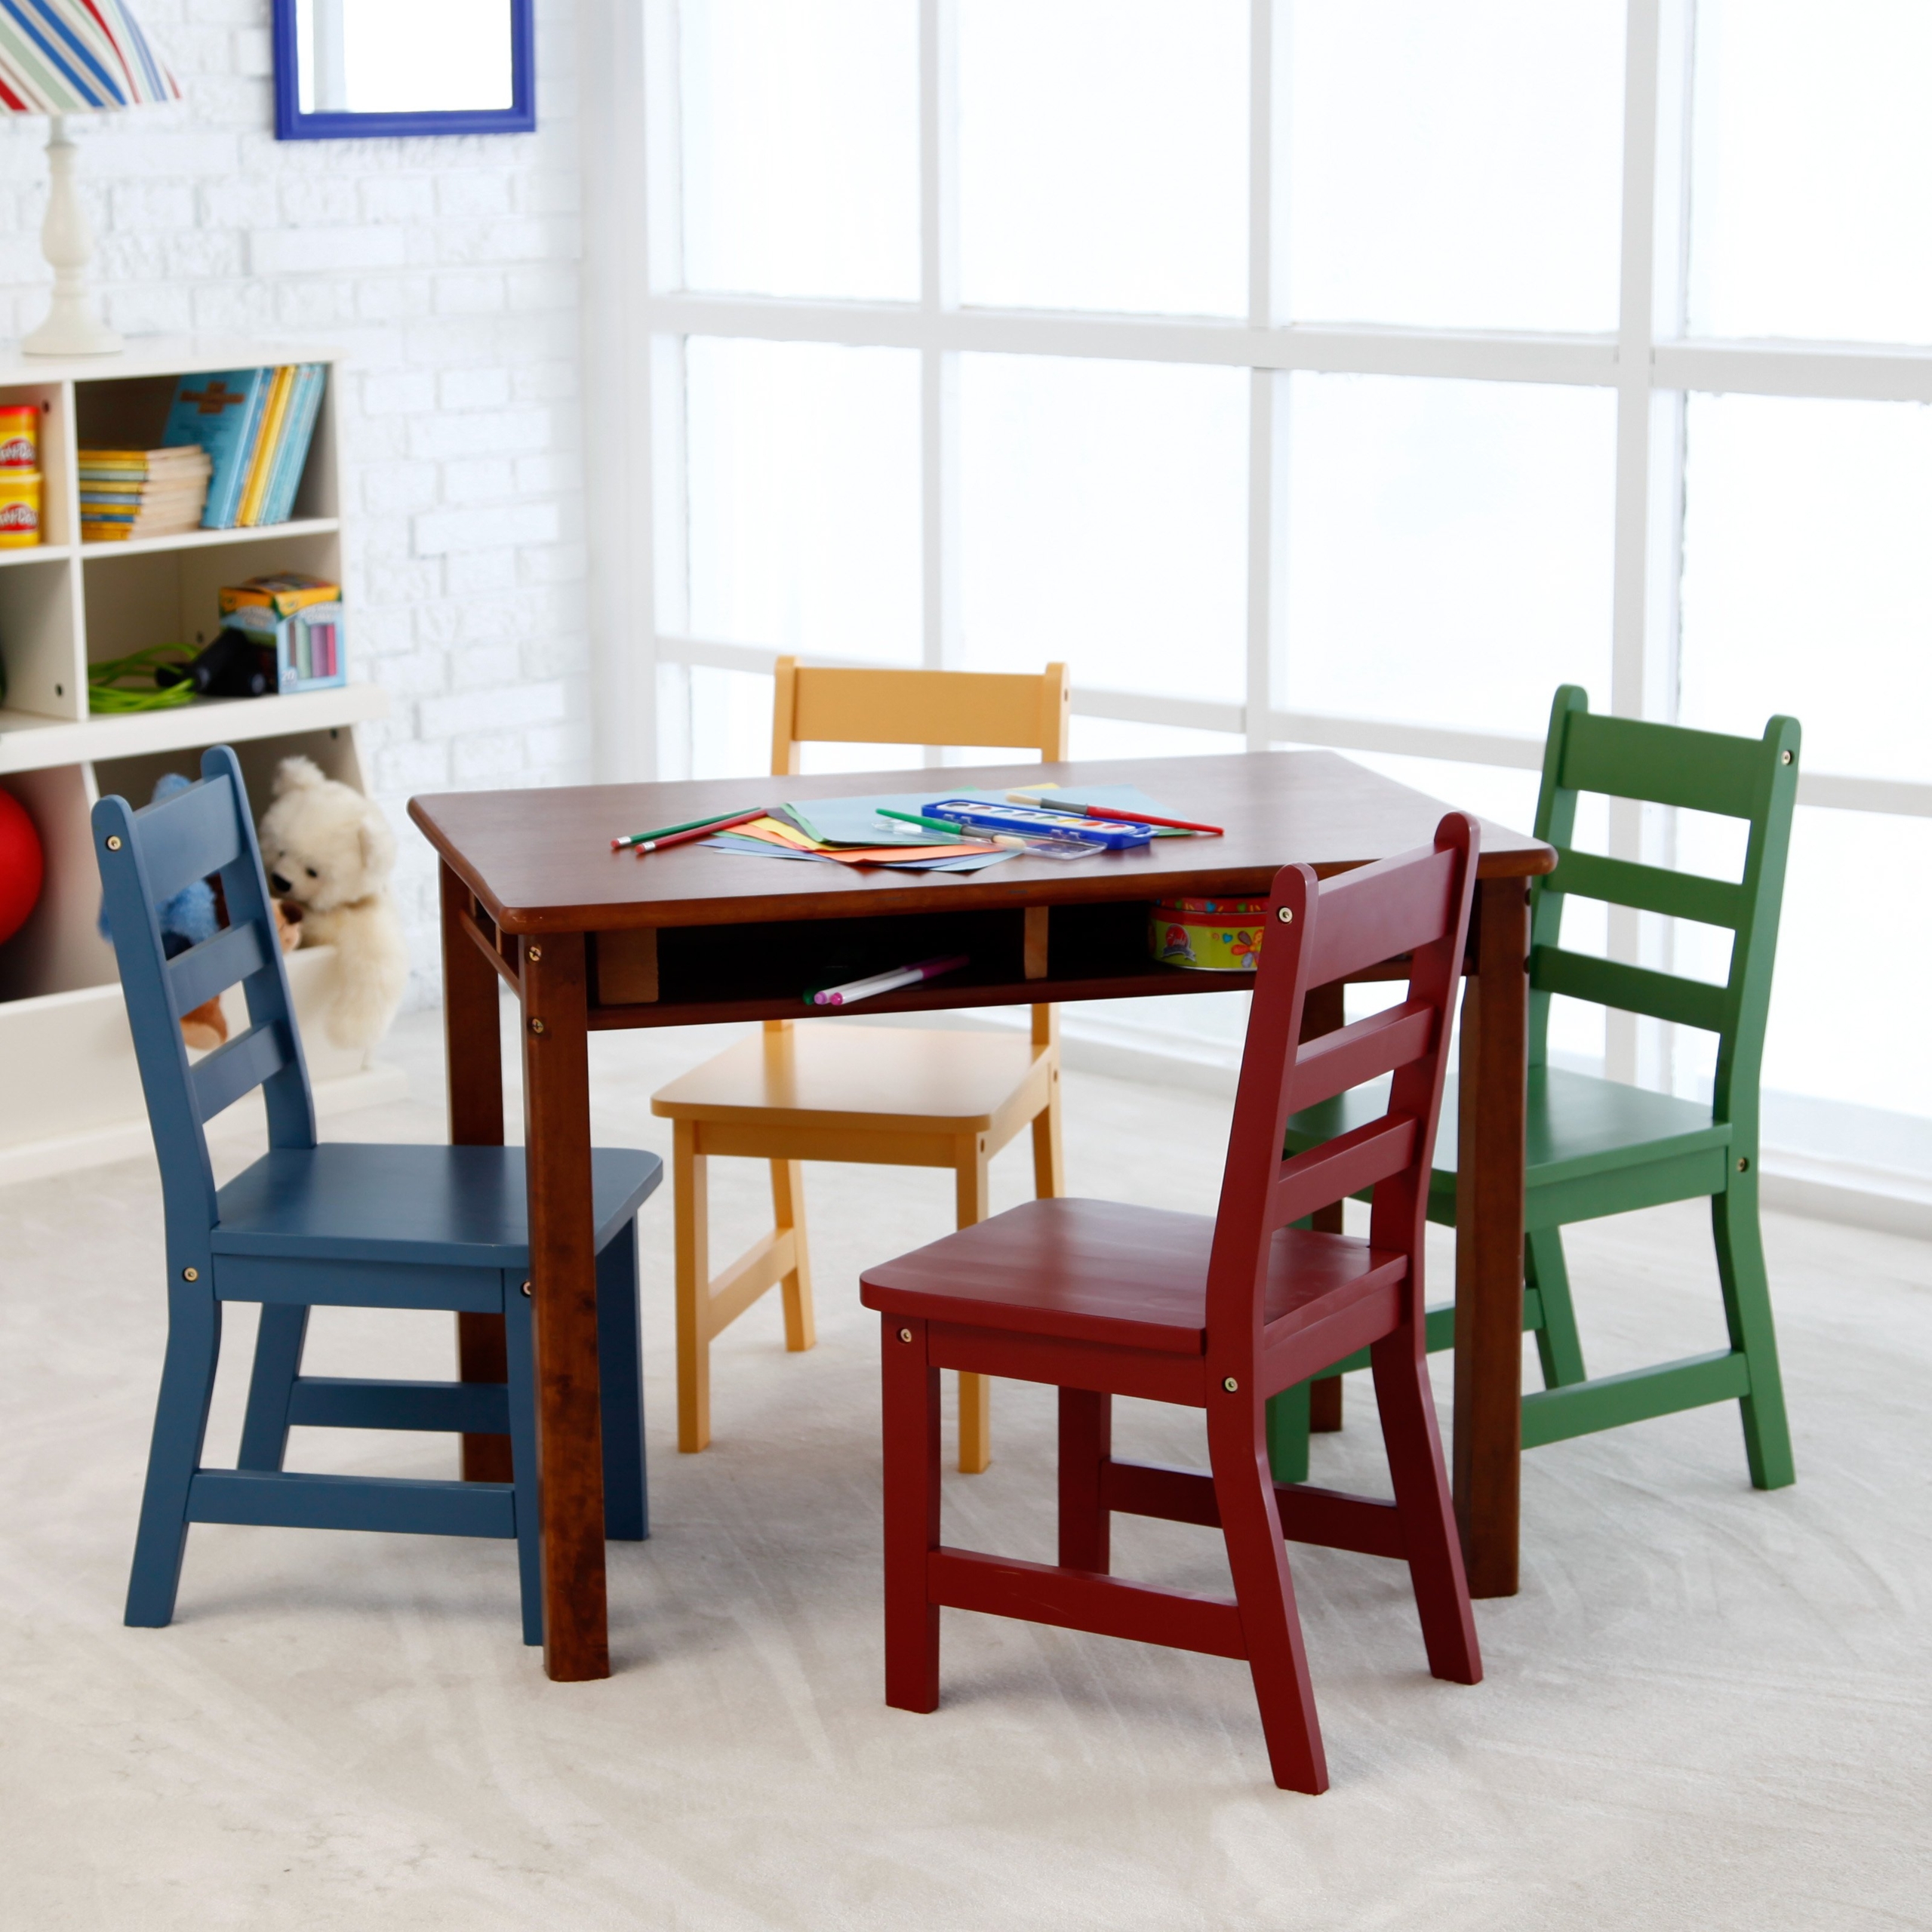 kids wooden table and chairs ikea